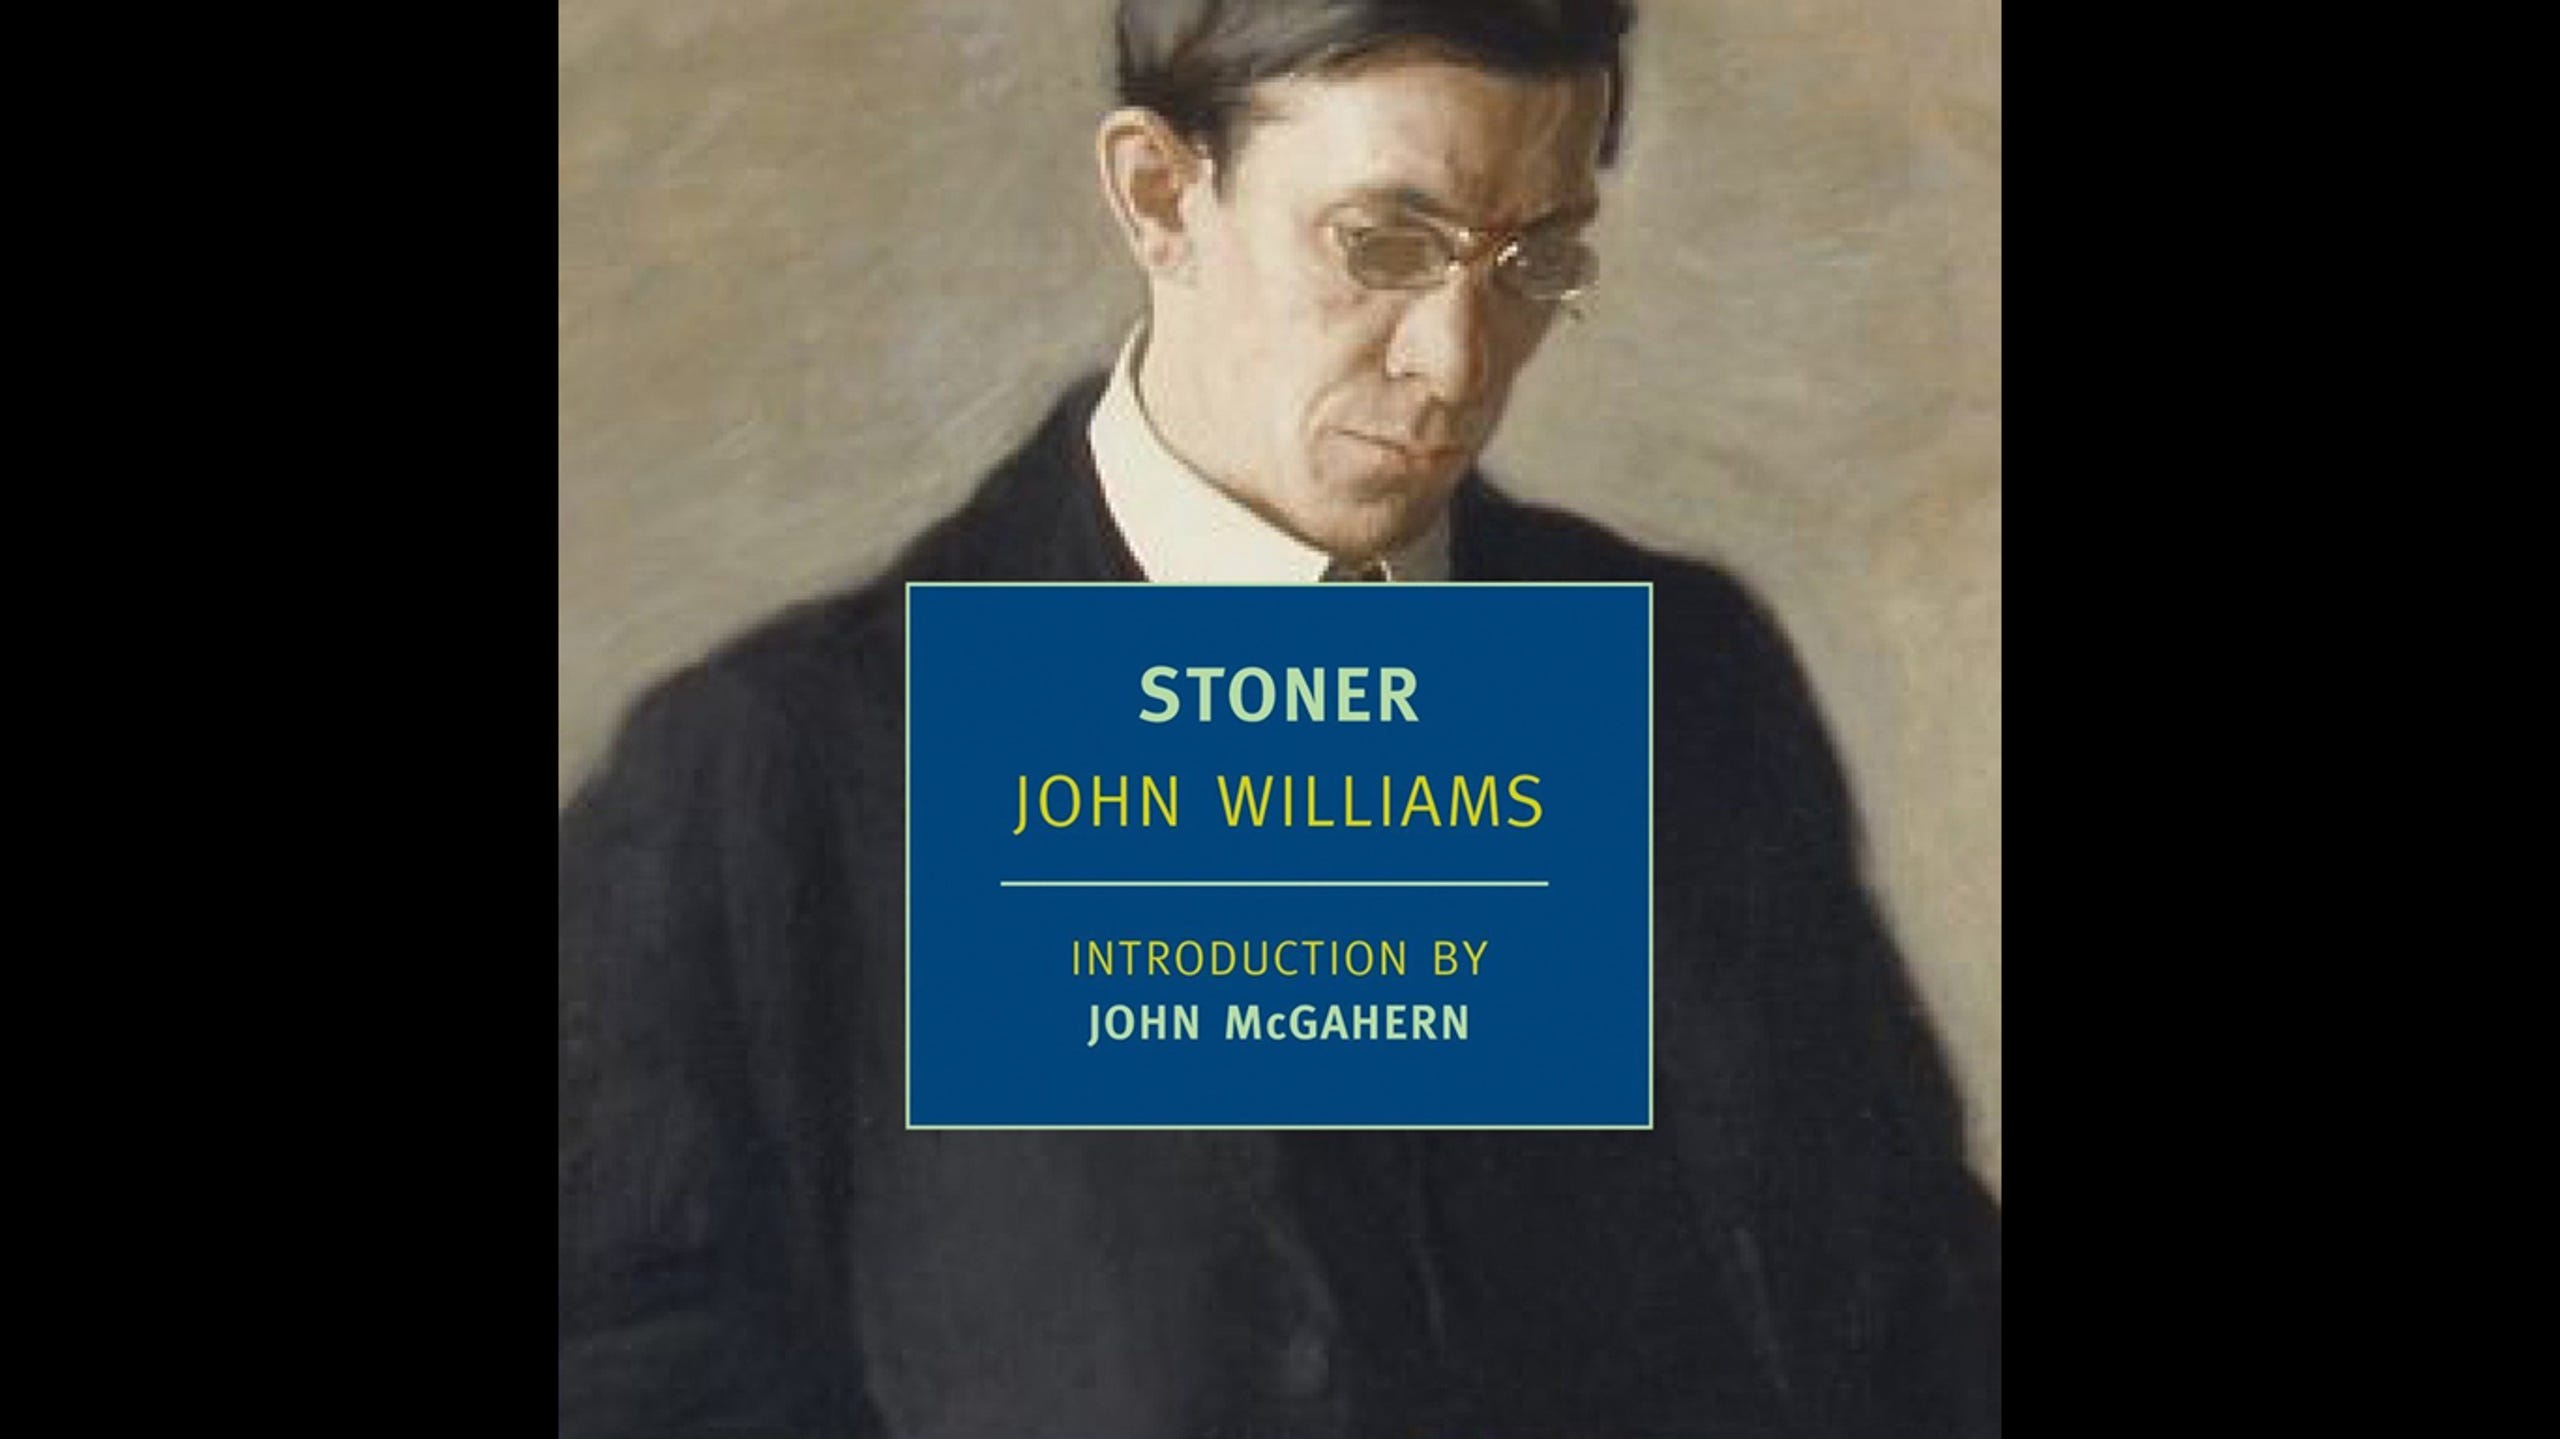 <strong>18. Stoner </strong><strong>• Author:</strong> John Williams <strong>• Originally published in:</strong> 1965 <strong>• </strong>"Stoner" is a book Buster "repeatedly" buys, especially to give to friends. "It's one of the most beautiful novels I know." The New Yorker called it once "the greatest American novel you've never heard of." It's about an educated man who never seems to achieve success and struggles with disappointments throughout his life. The protagonist is basically someone who is – like the majority of the world's population – an unglamorous, hardworking person whose marriage goes badly, is estranged from his child, and just lives the rest of his life pursuing a dead-end career.